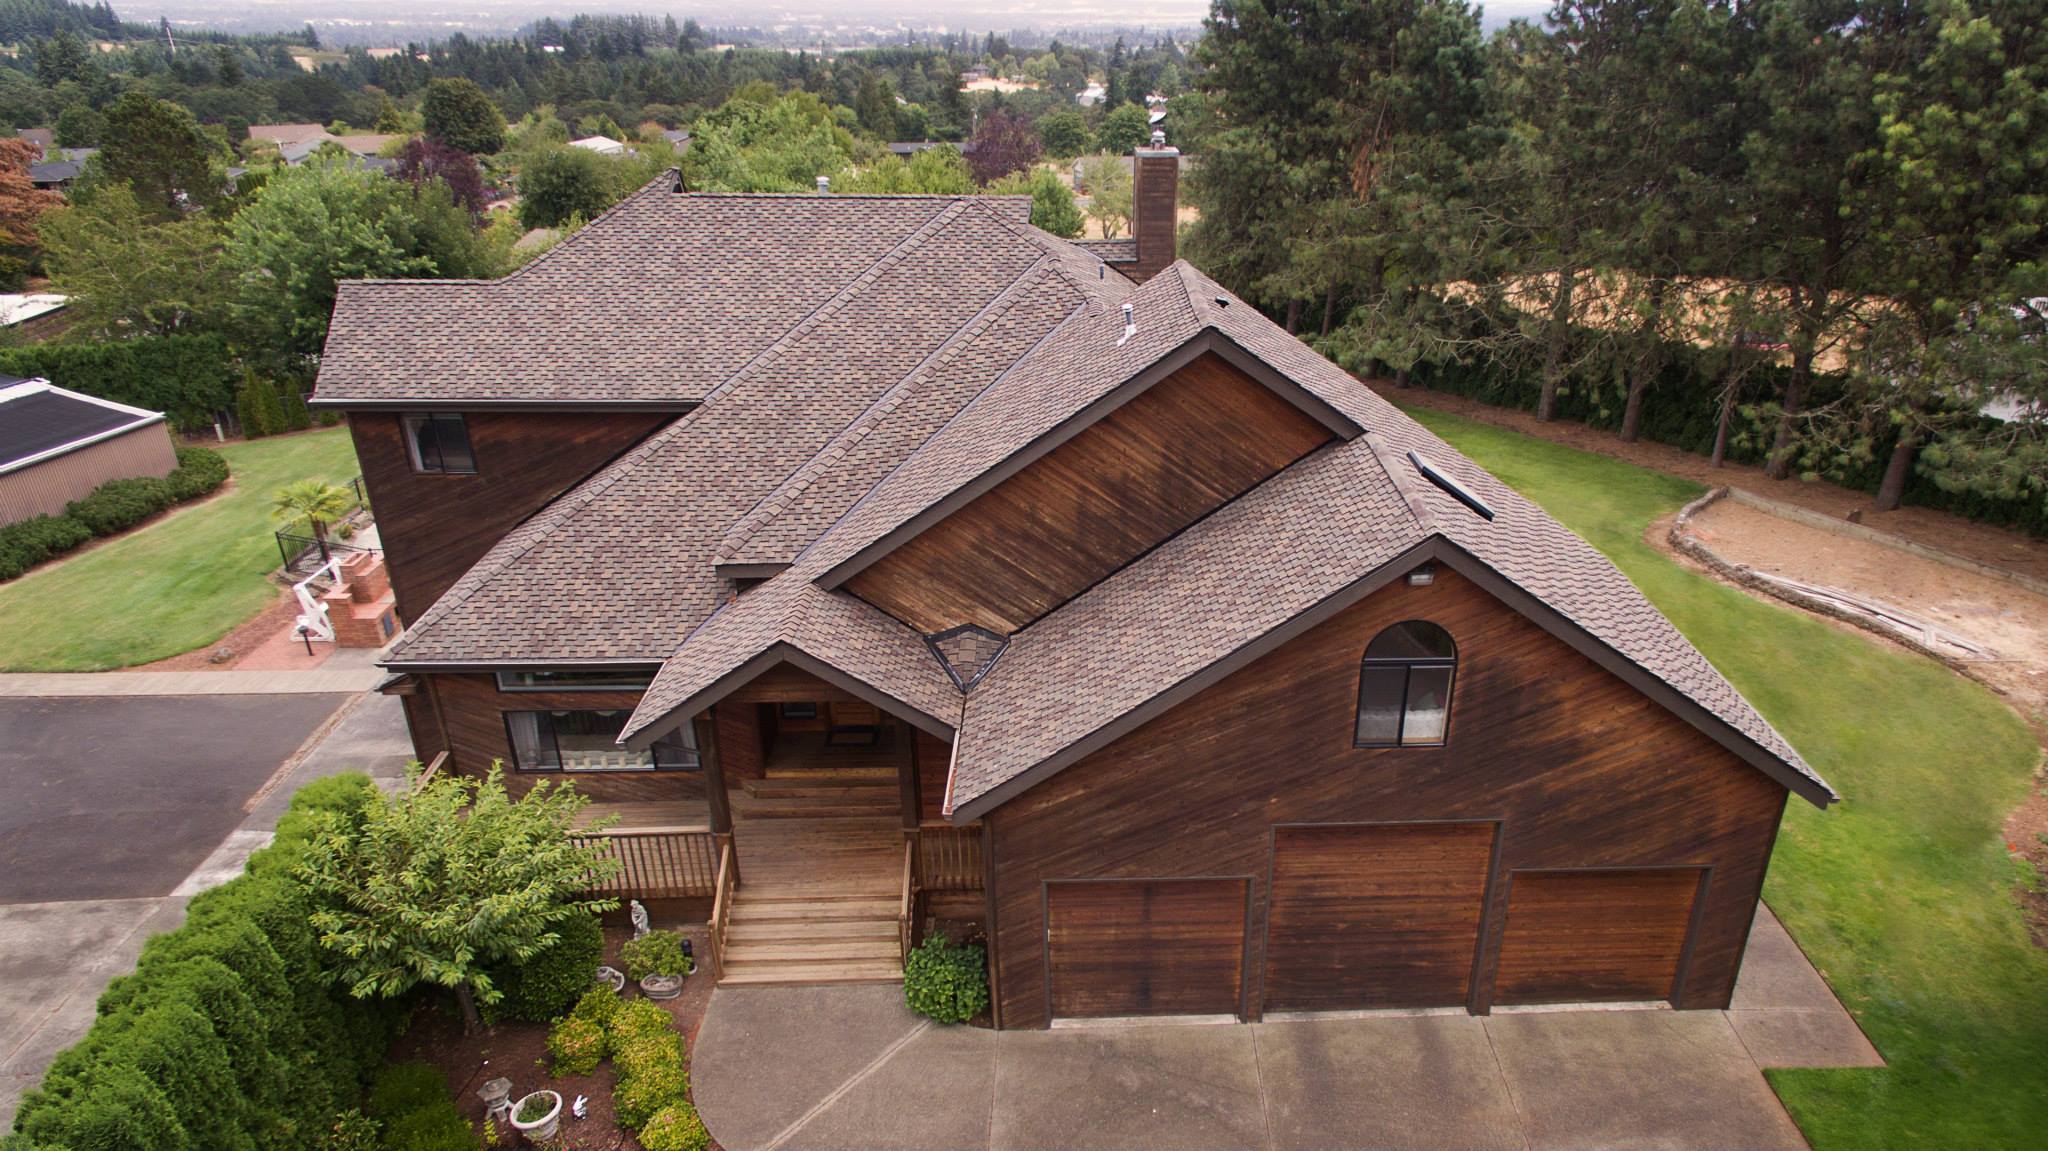 Valley Roofing did this roof, shingles, skylights, and gutters on a unque wooden home.